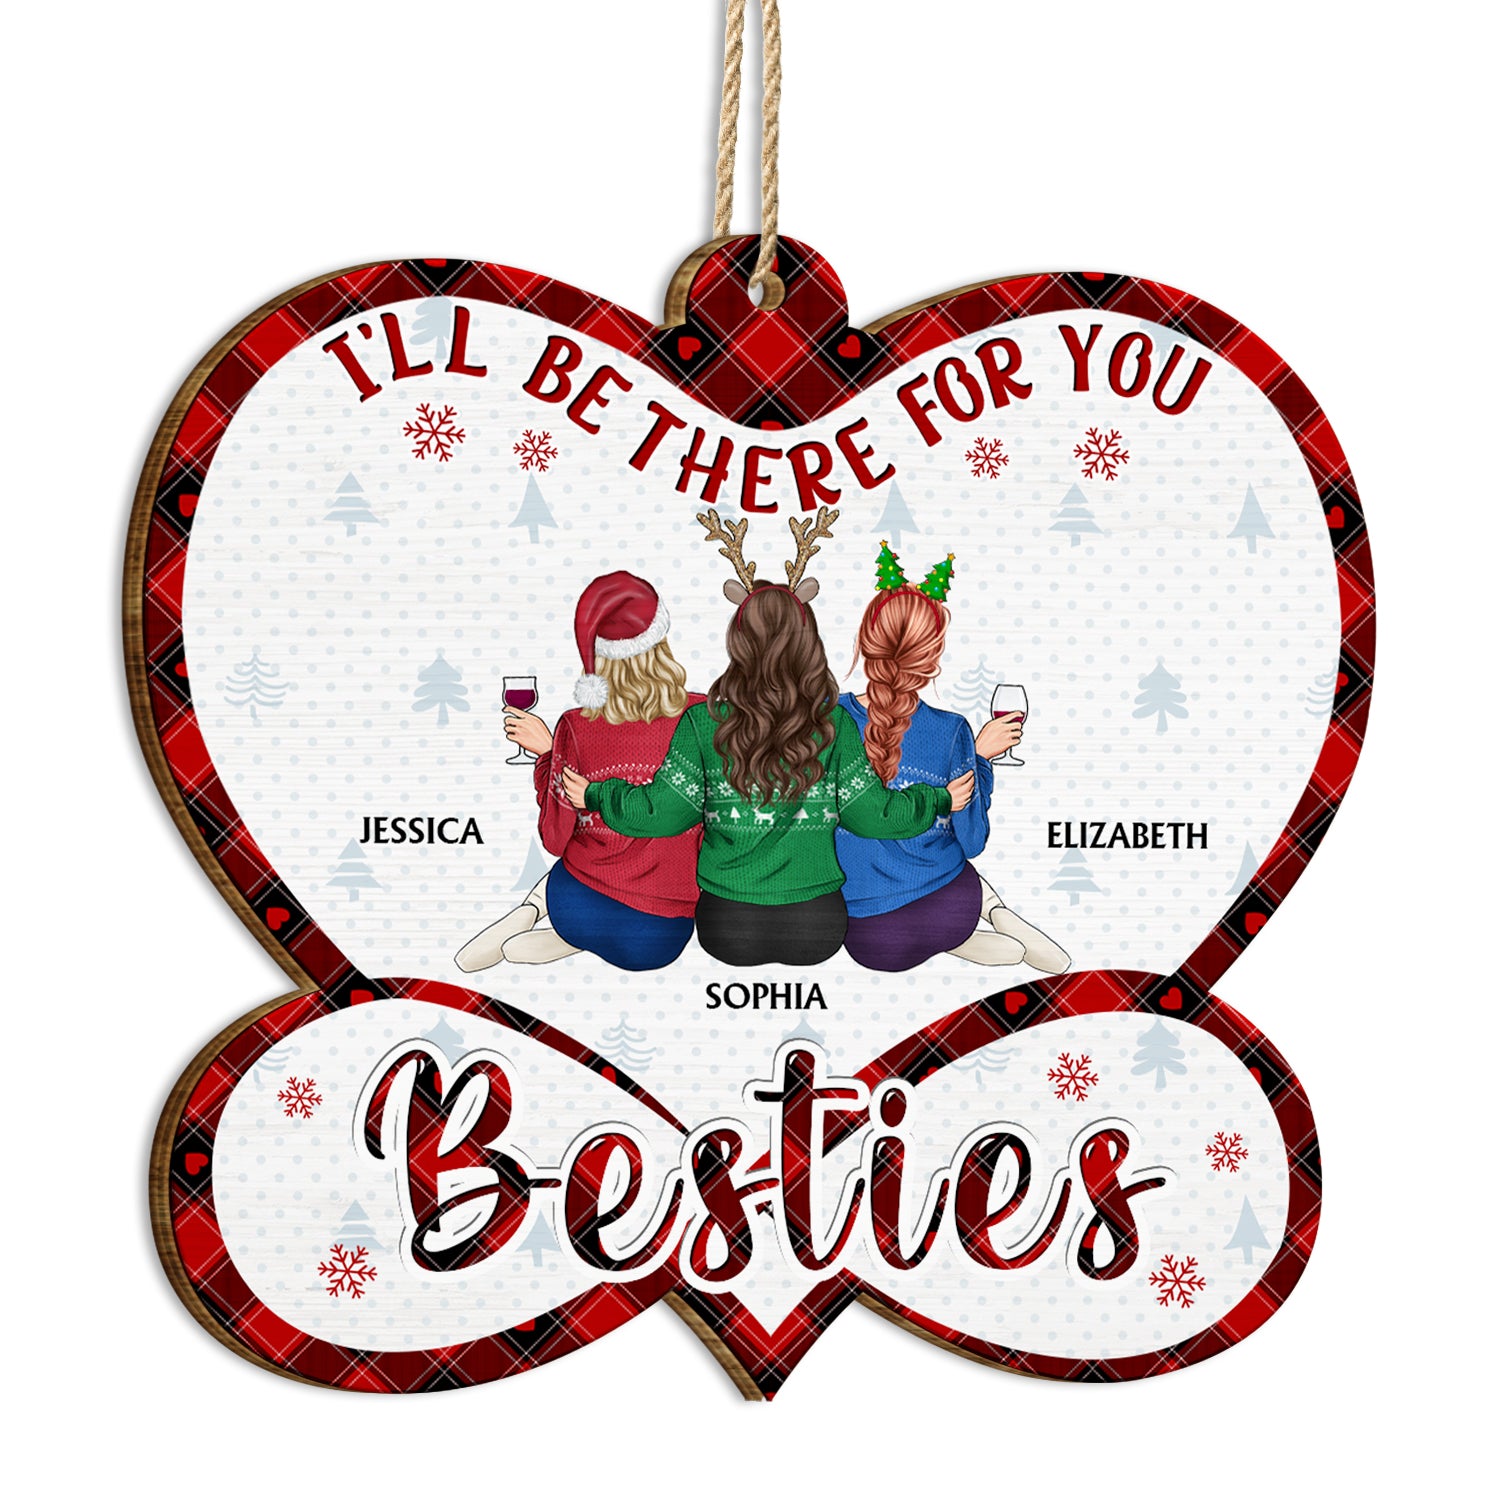 I'll Be There For You - Christmas Gifts For Best Friends, Besties - Personalized Custom Shaped Wooden Ornament